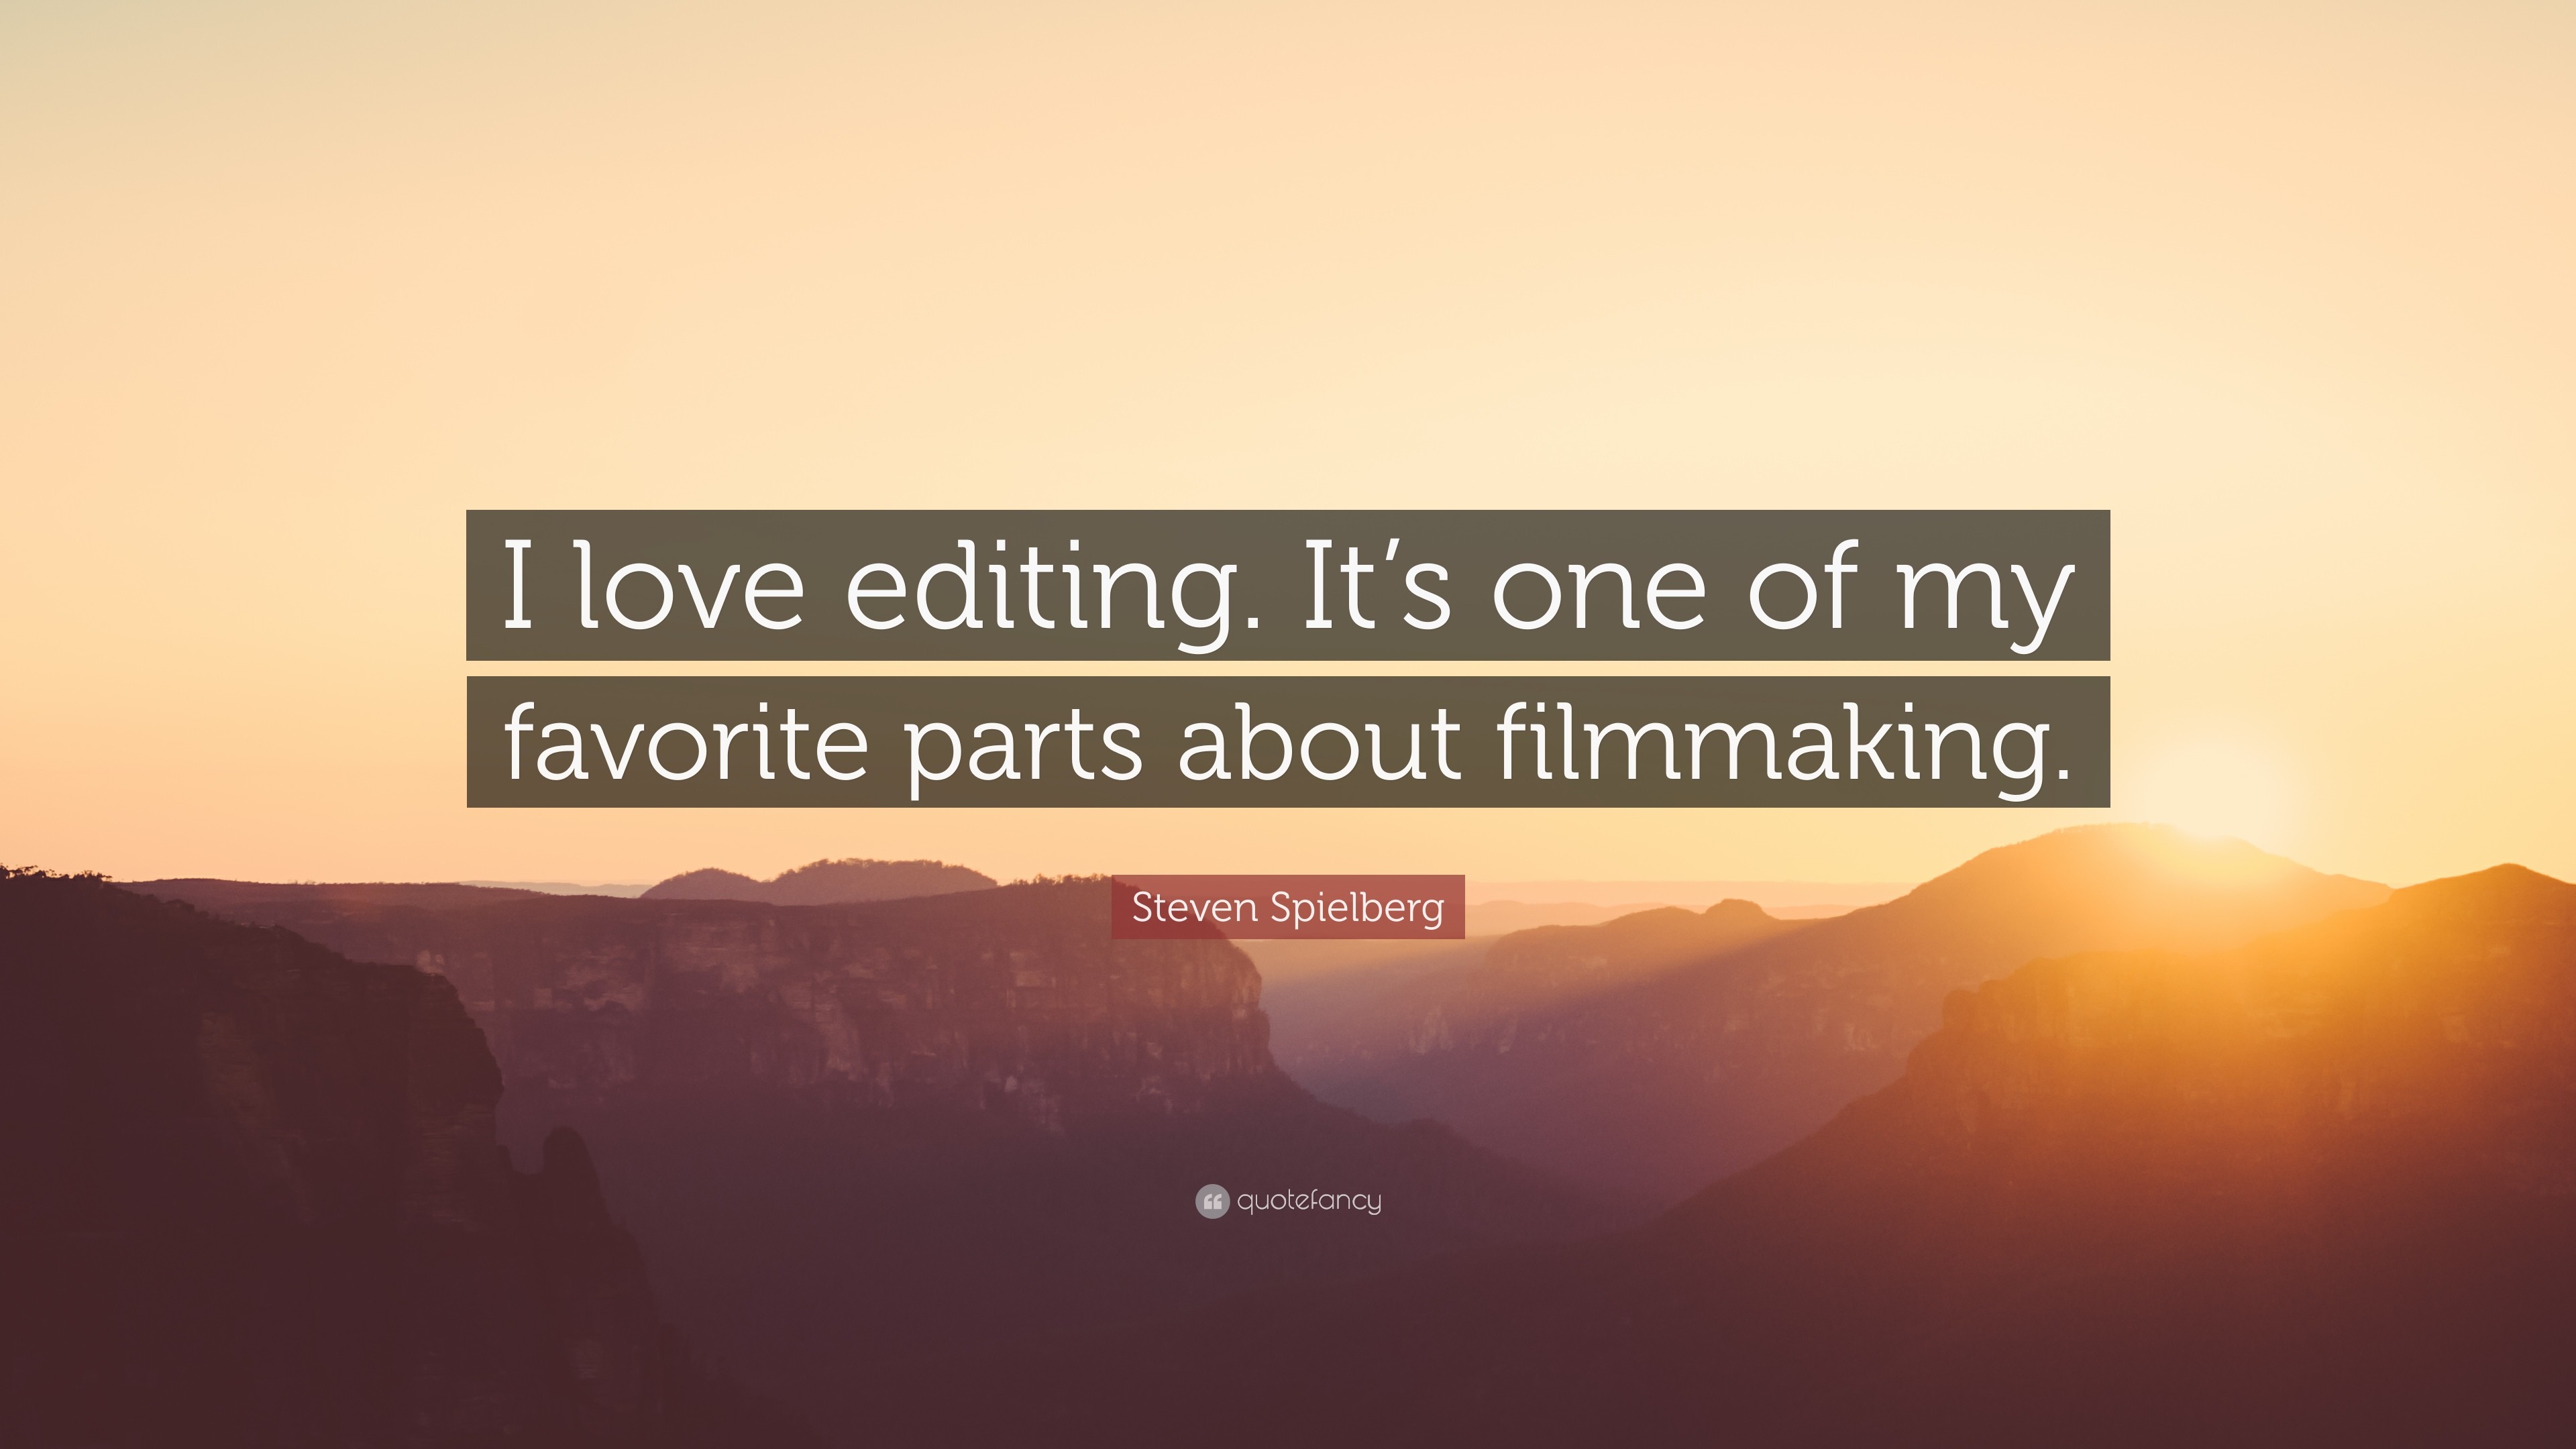 3840x2160 Steven Spielberg Quote: “I love editing. It's one of my favorite parts about